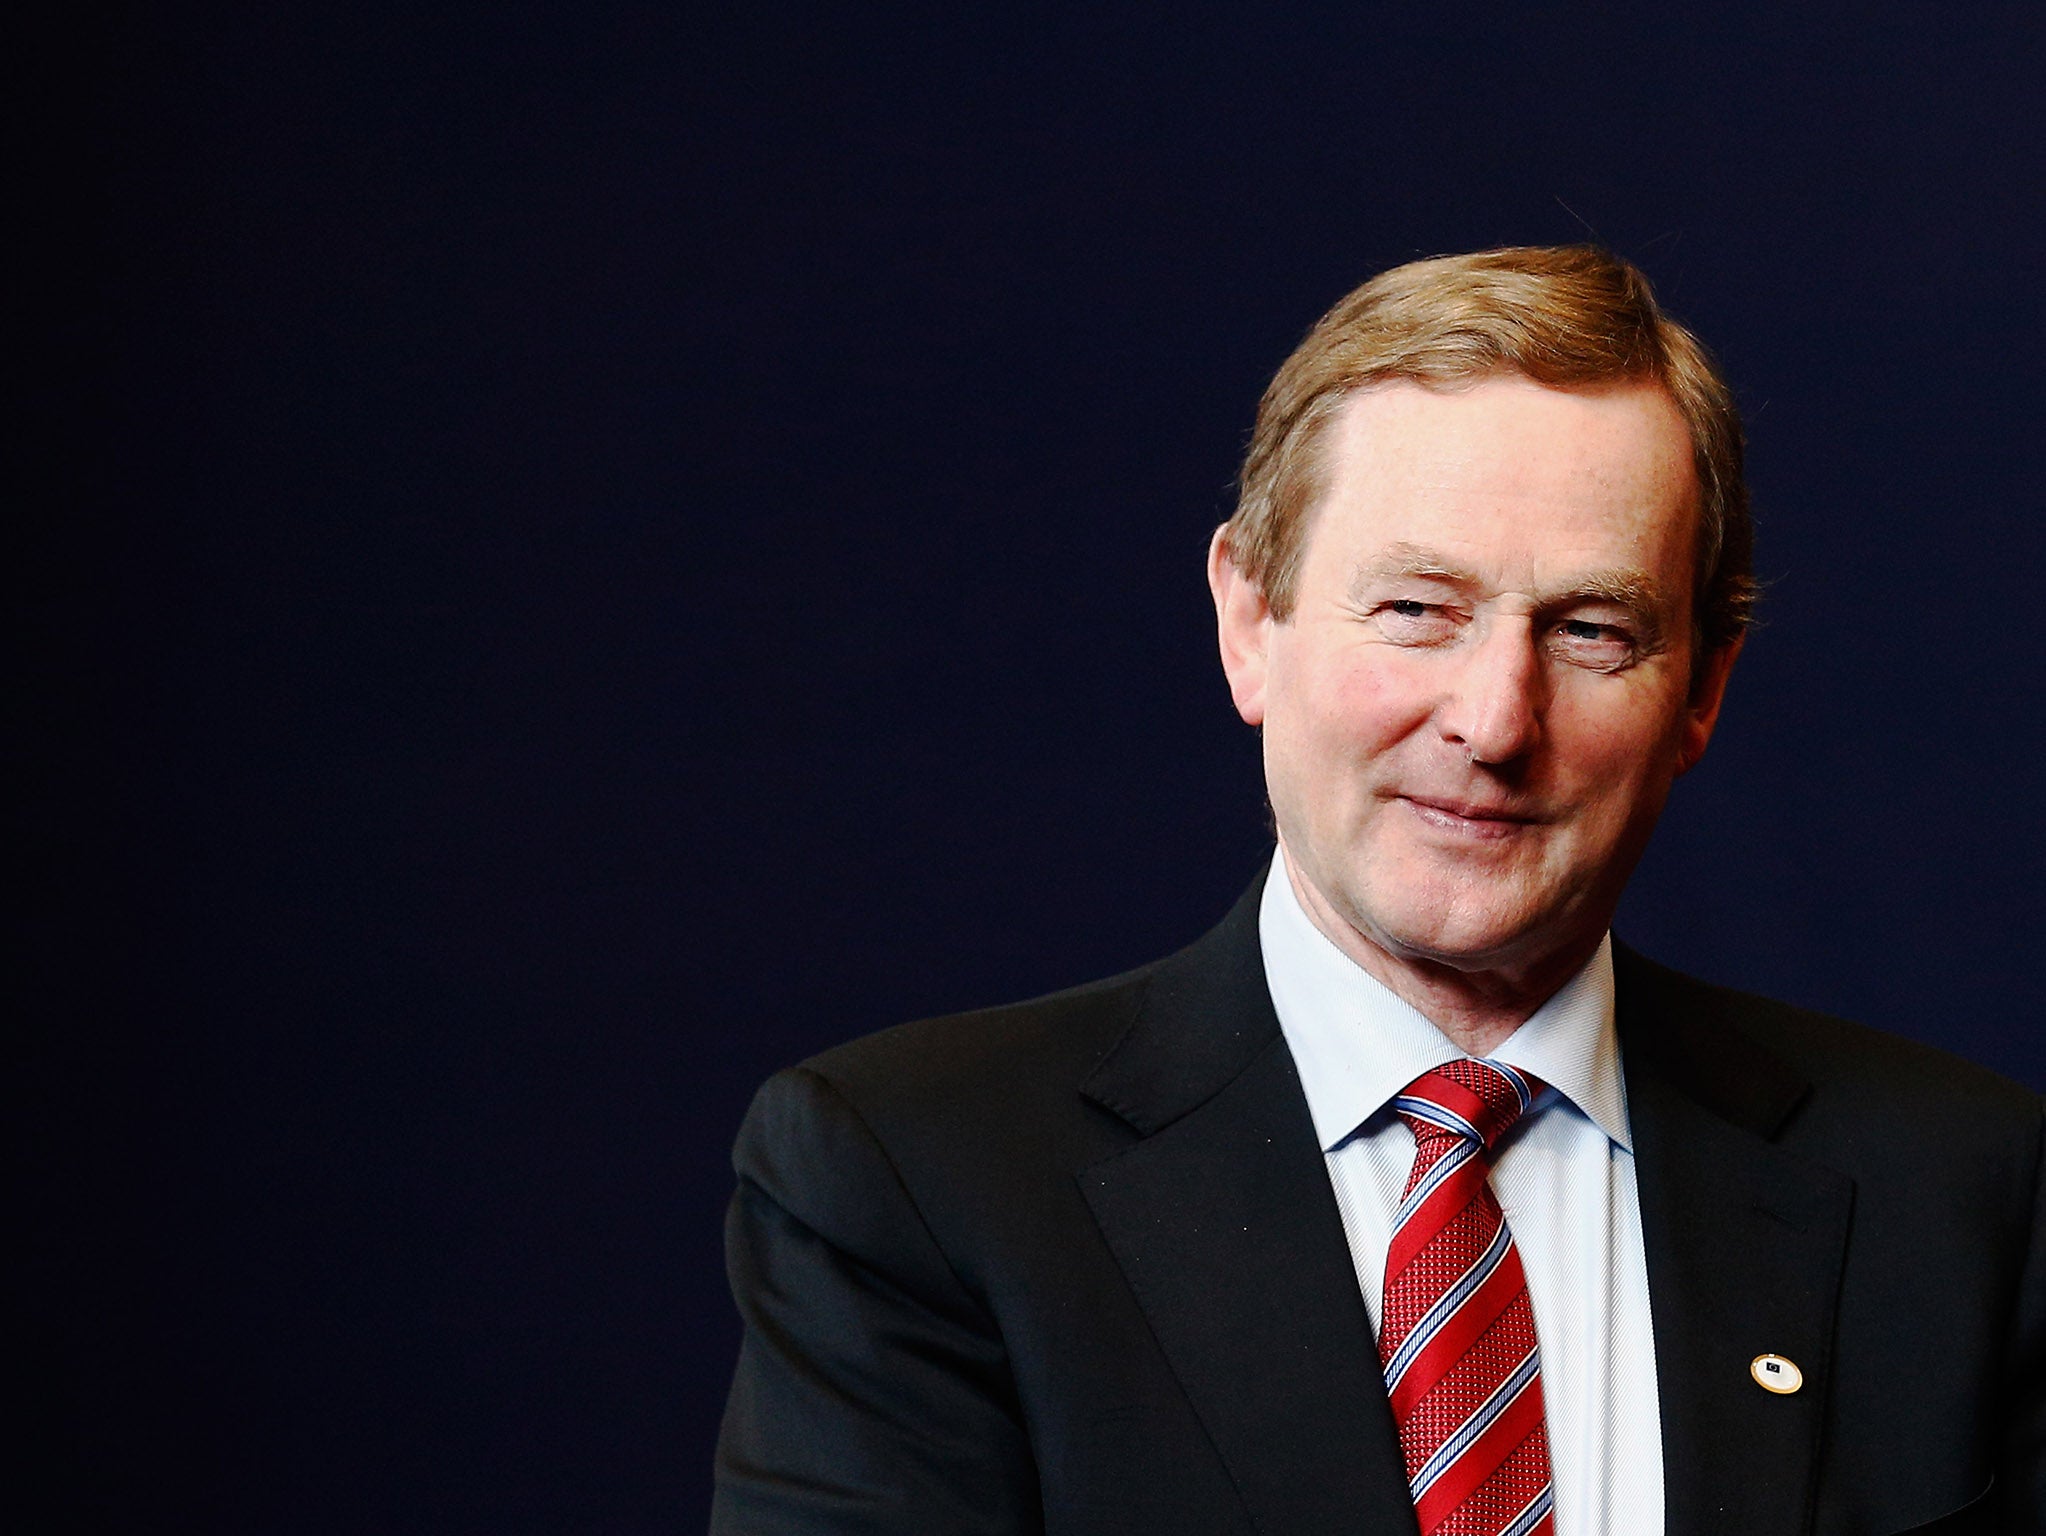 Enda Kenny will lead a minority government